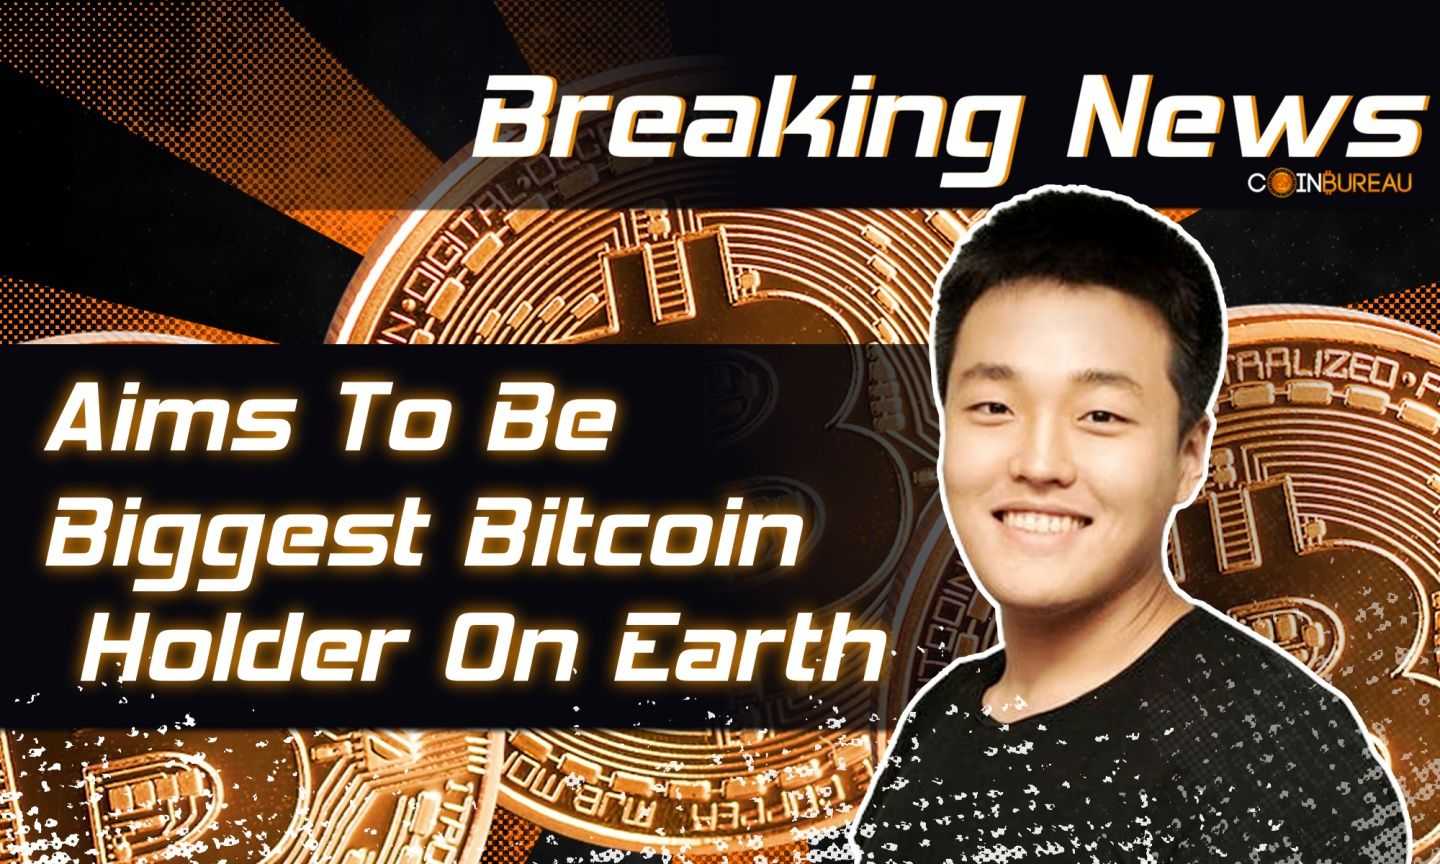 Terraform Labs Founder Do Kwon Aims To Be Biggest Bitcoin Holder On Earth